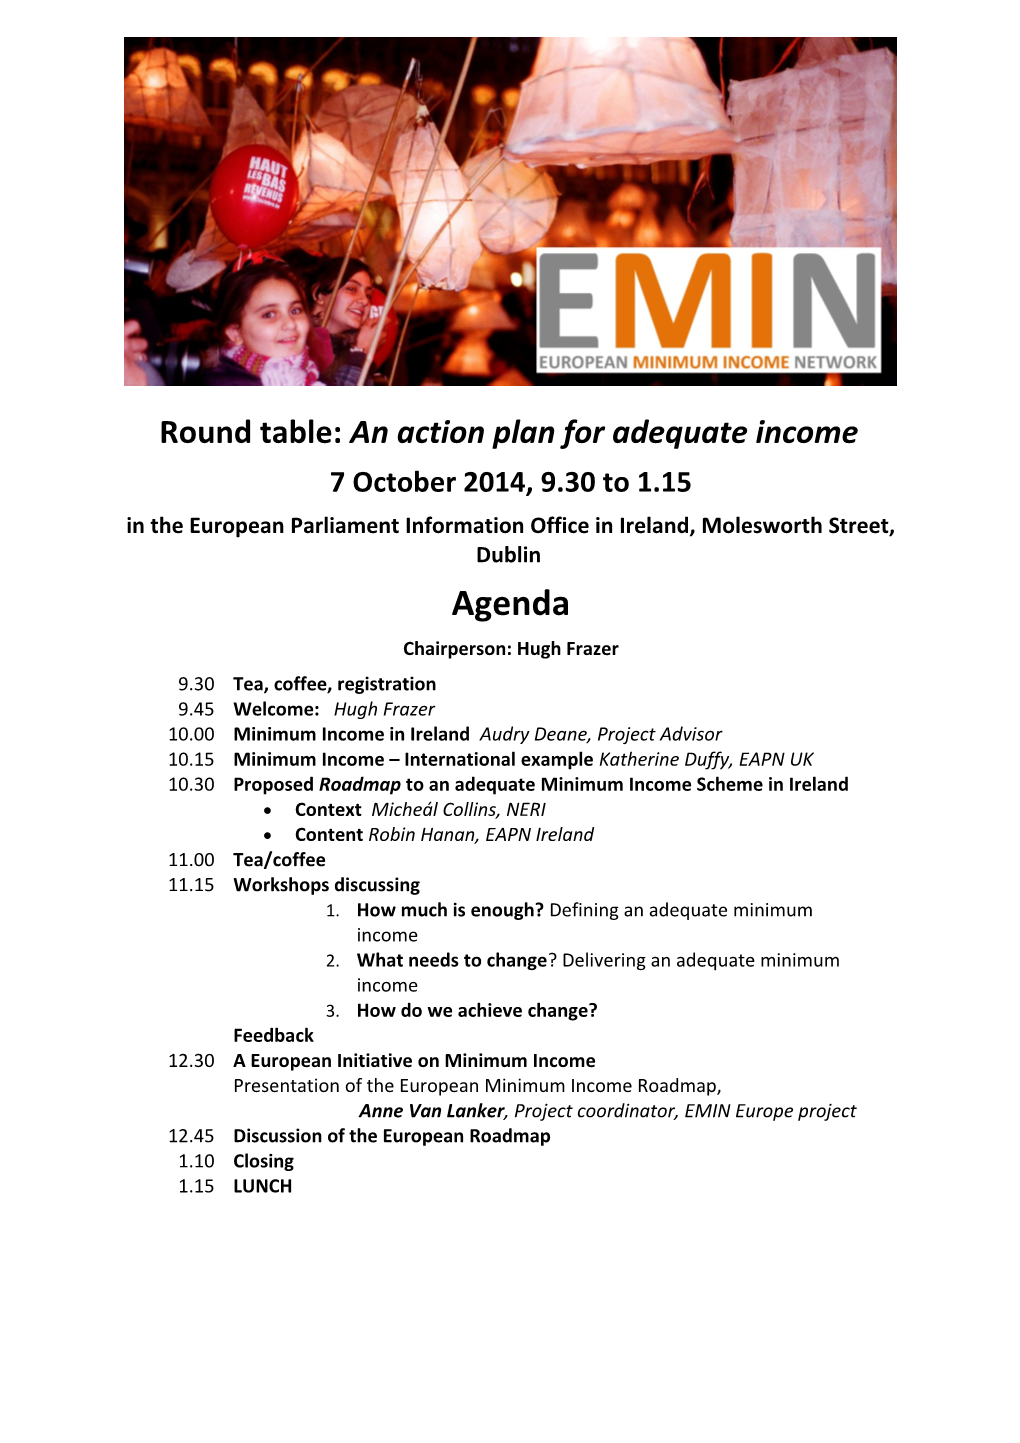 Round Table: an Action Plan for Adequate Income